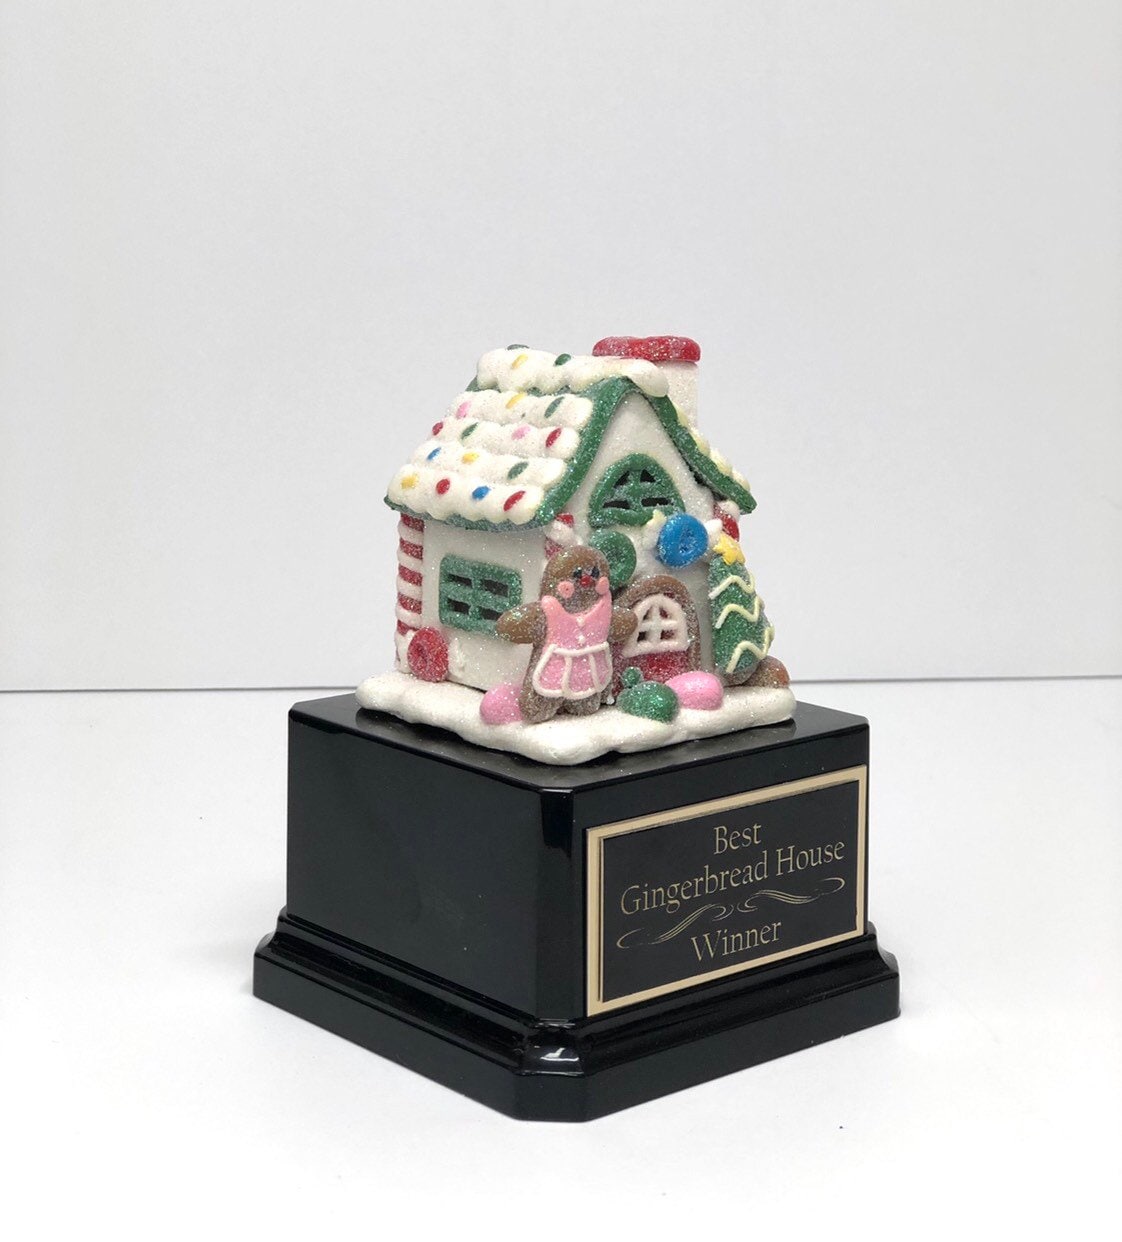 Gingerbread House Cookie Bake Off Competition Trophy Ugly Sweater Trophy Contest Award Winner Christmas Cookie Snowman Christmas Decor